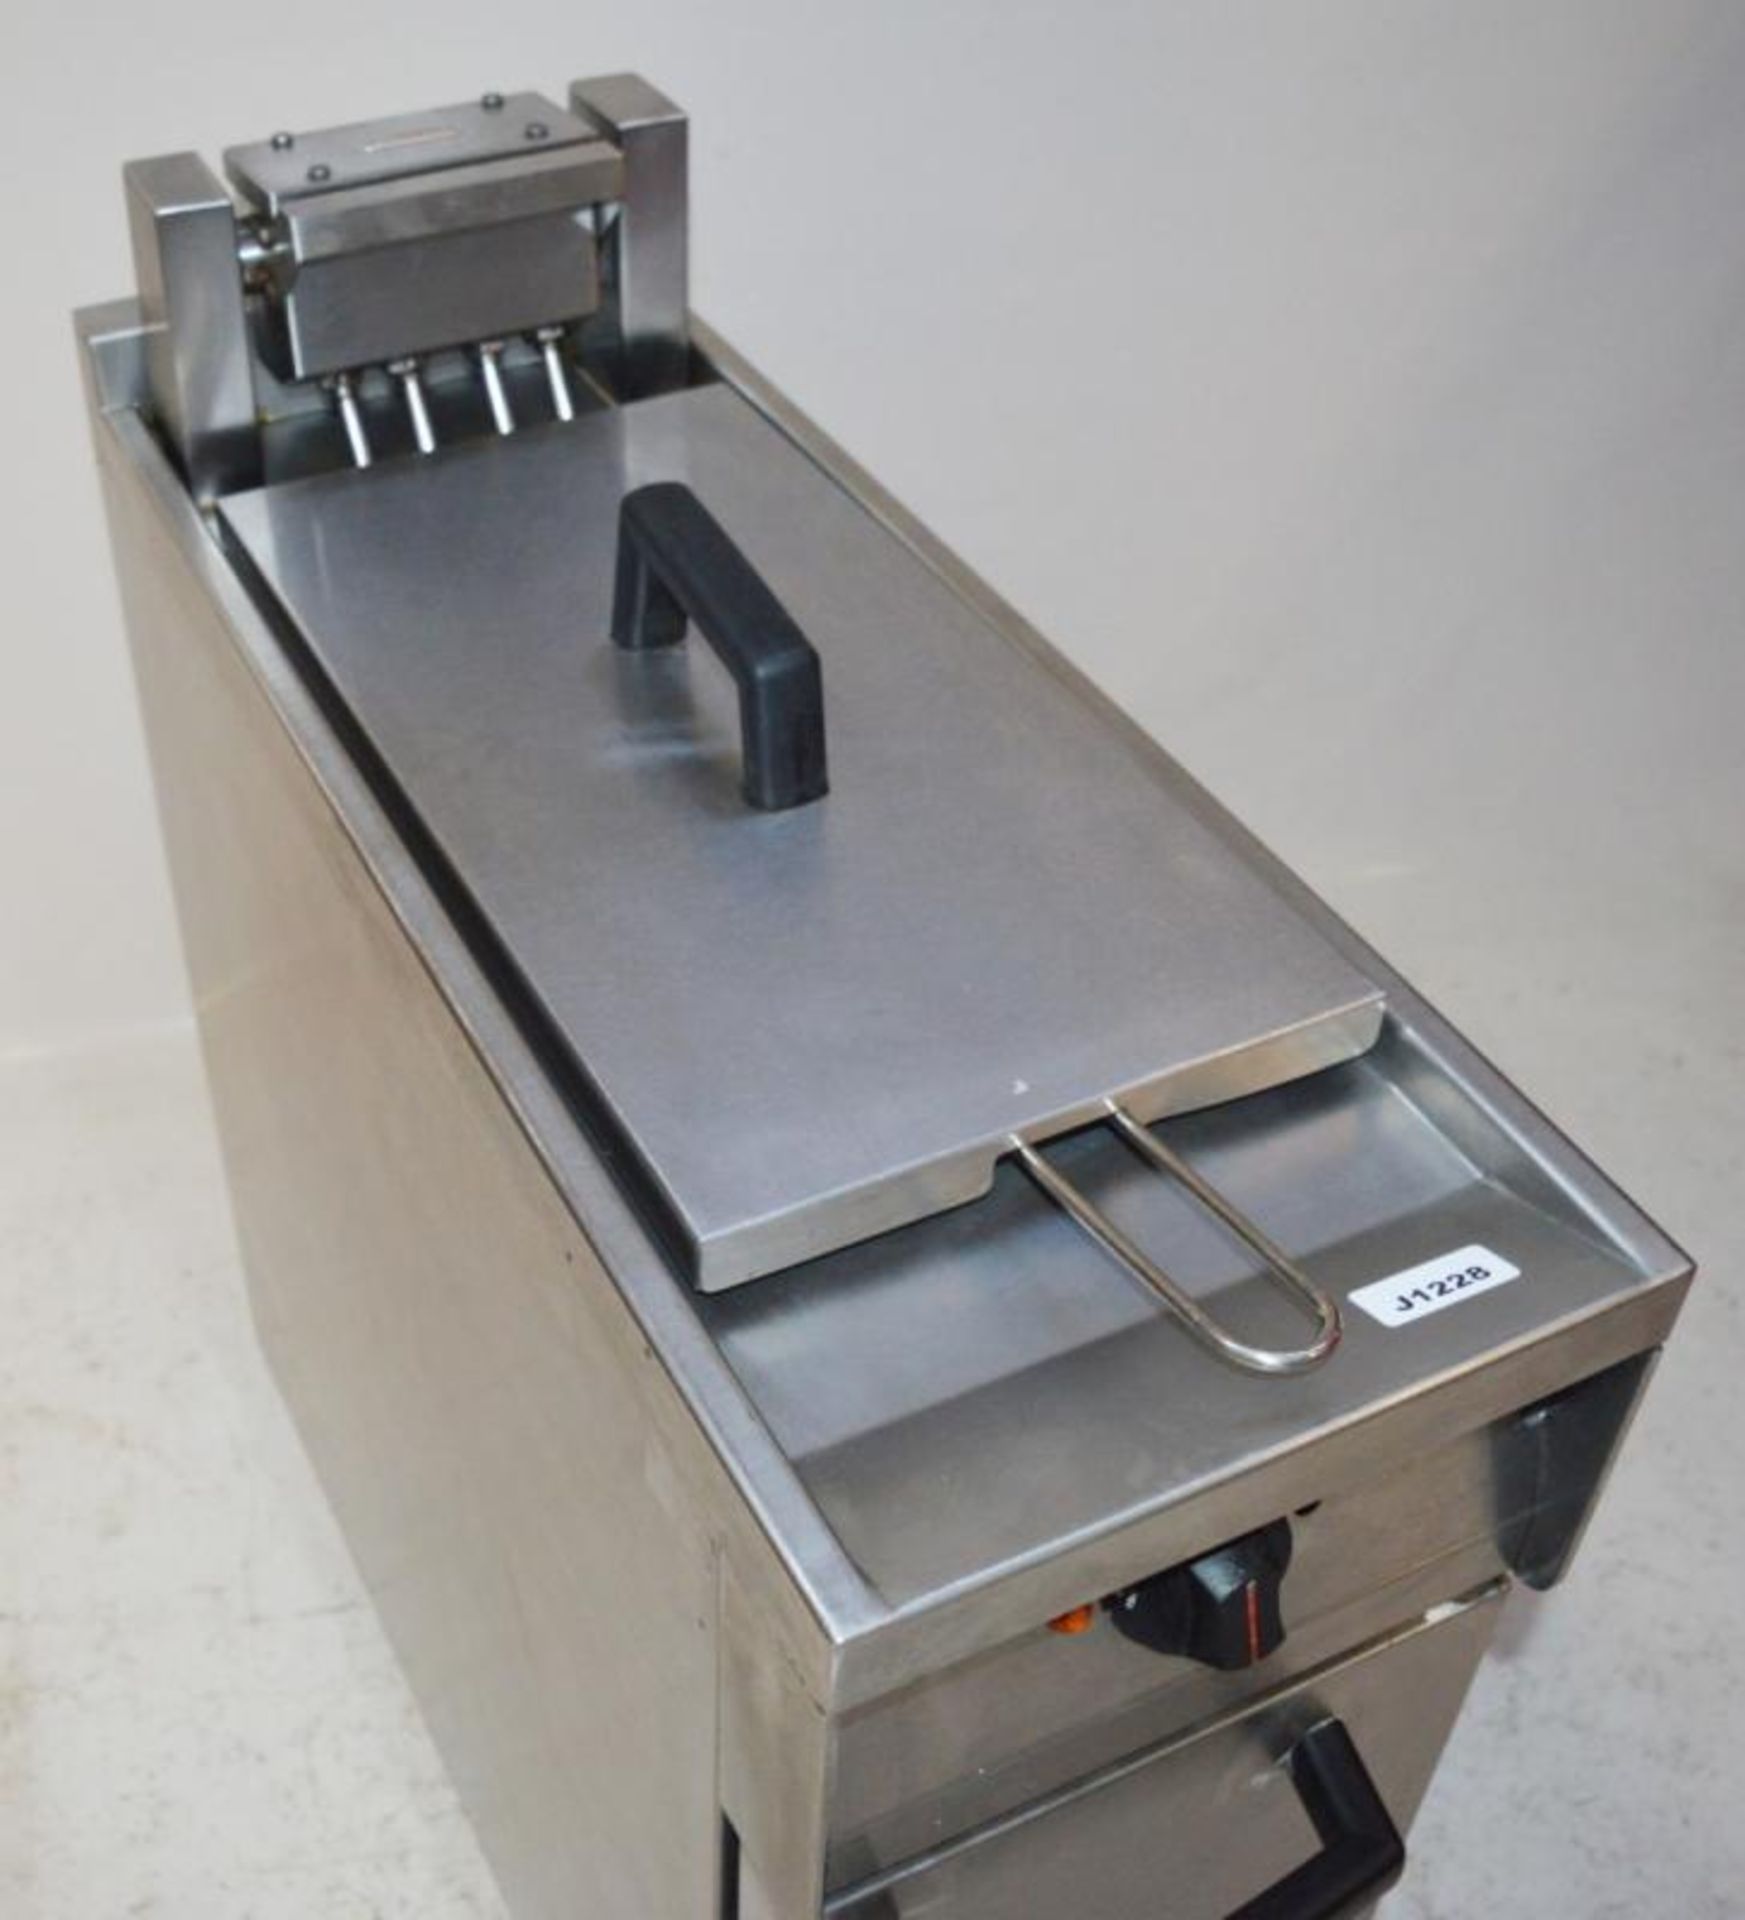 1 x Falcon Dominator E1830 Electric 3 Phase Fryer Cooker - Stainless Steel - H84 x W30 x D77 cms - C - Image 12 of 13